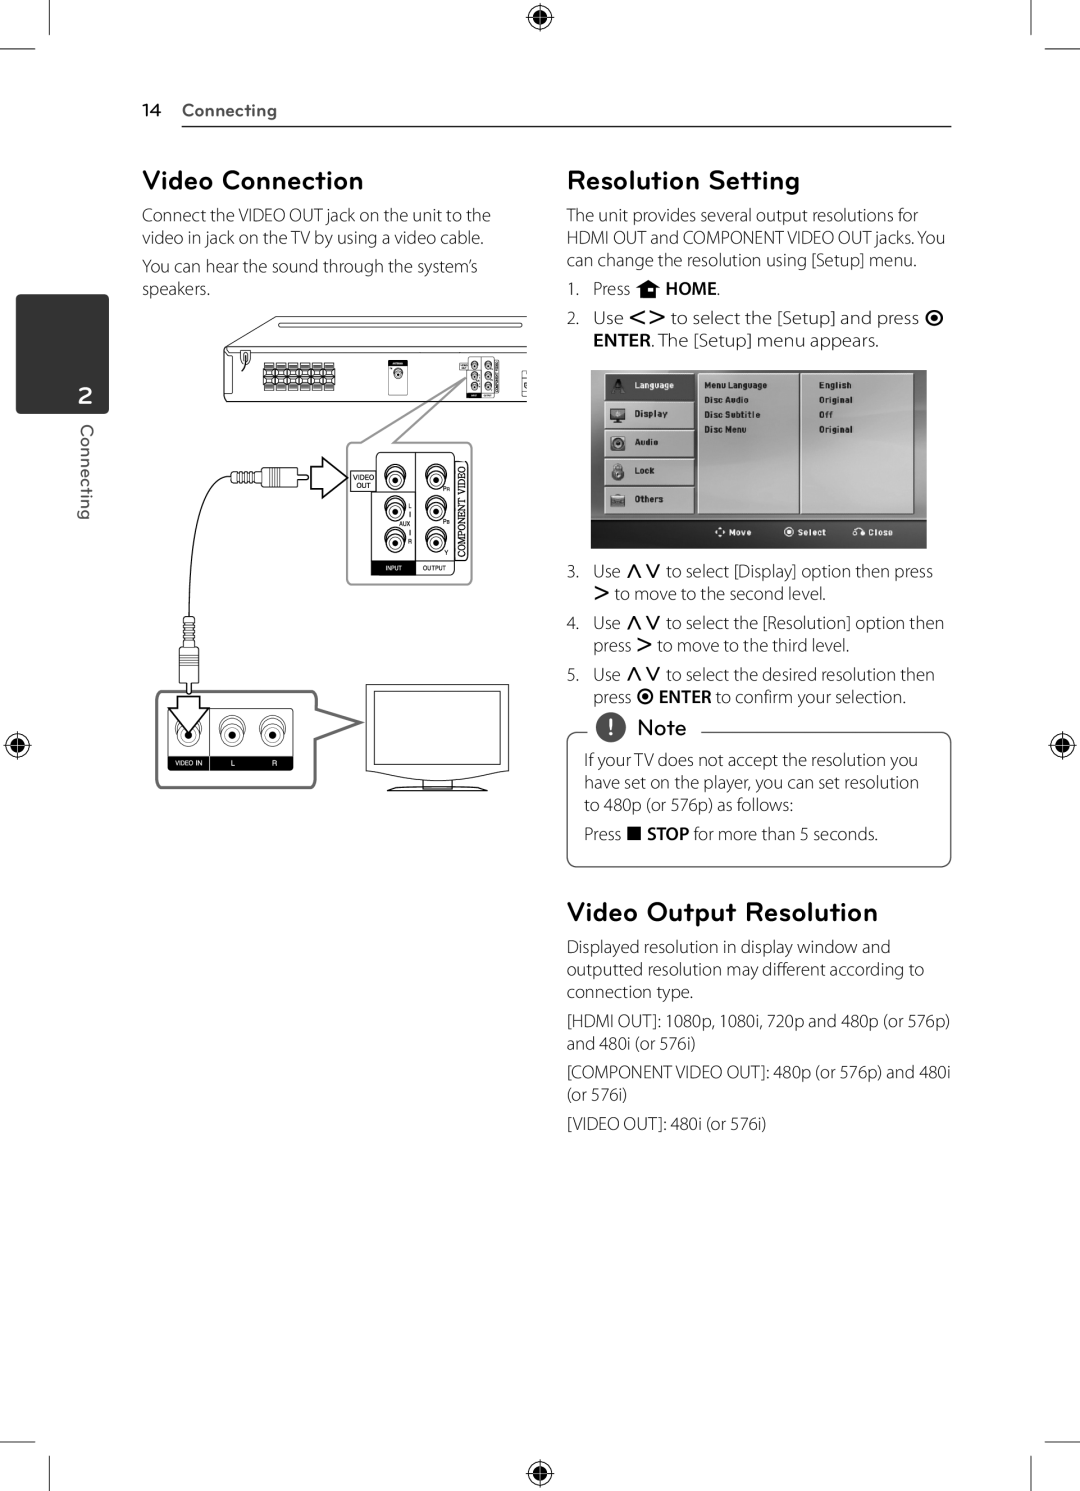 LG Electronics DH4220S owner manual Video Connection, Video Output Resolution, Resolution Setting, Connecting 